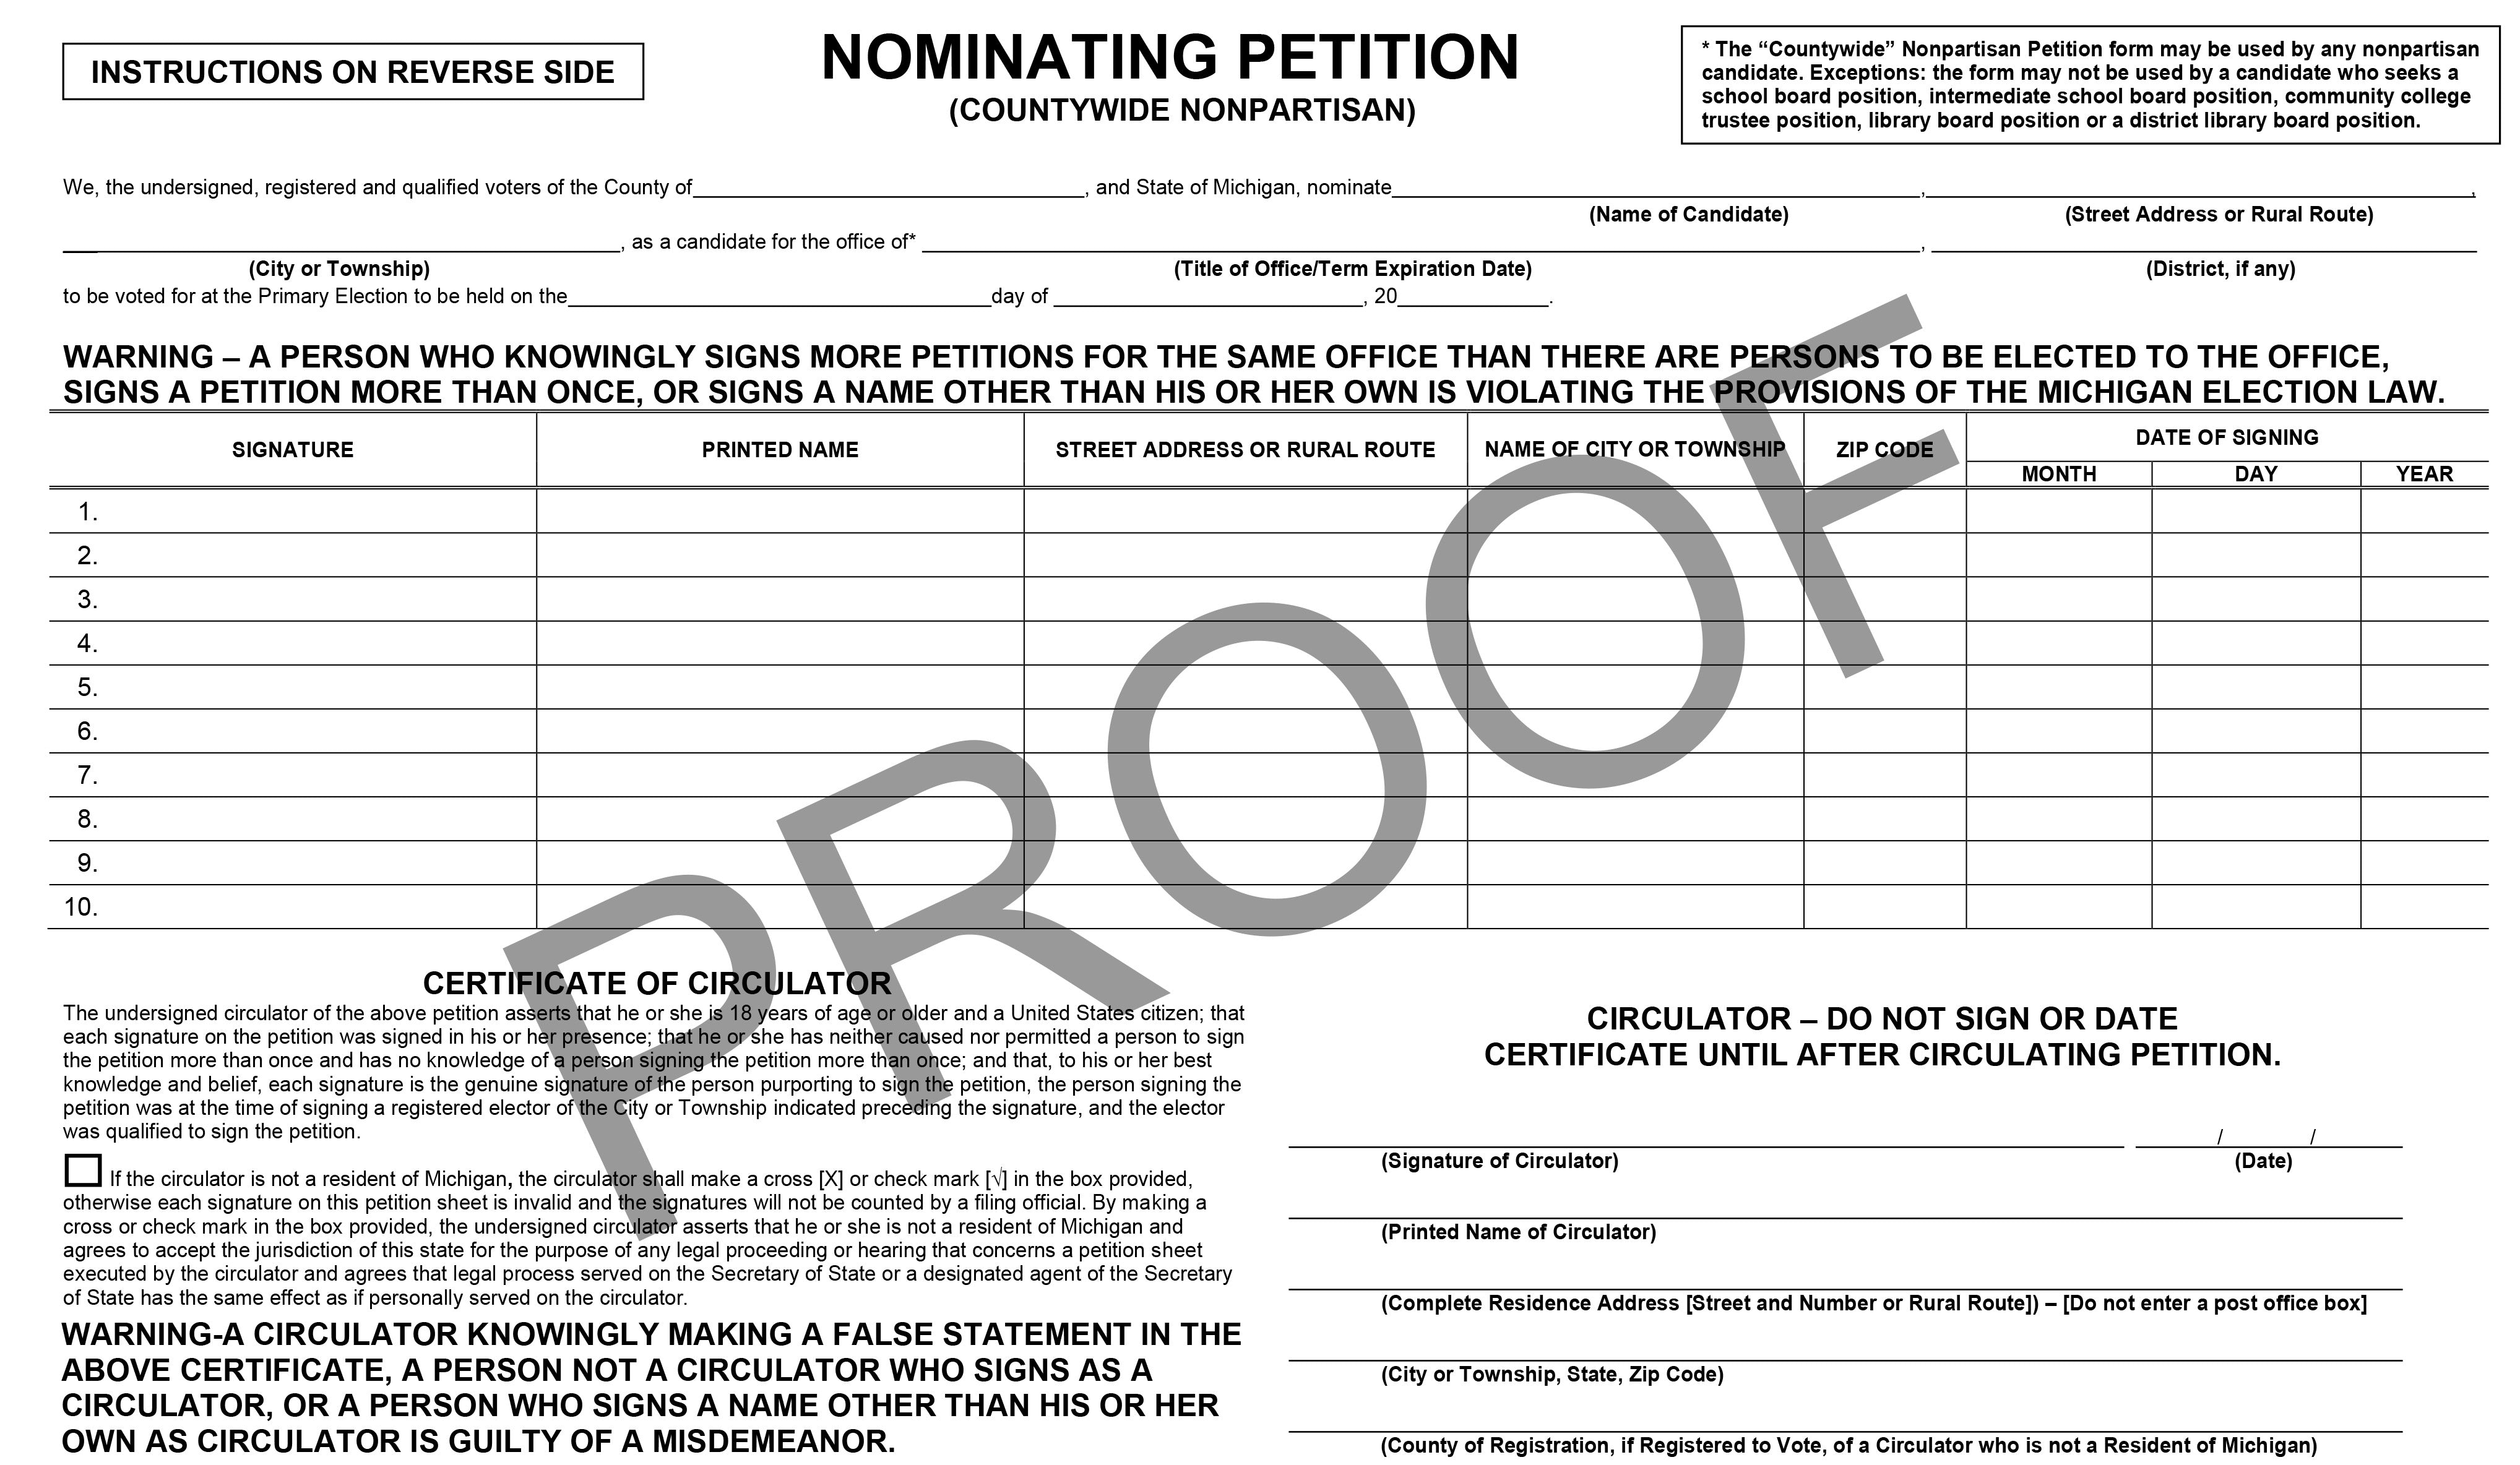 Nominating Petition (County Wide Nonpartisan)